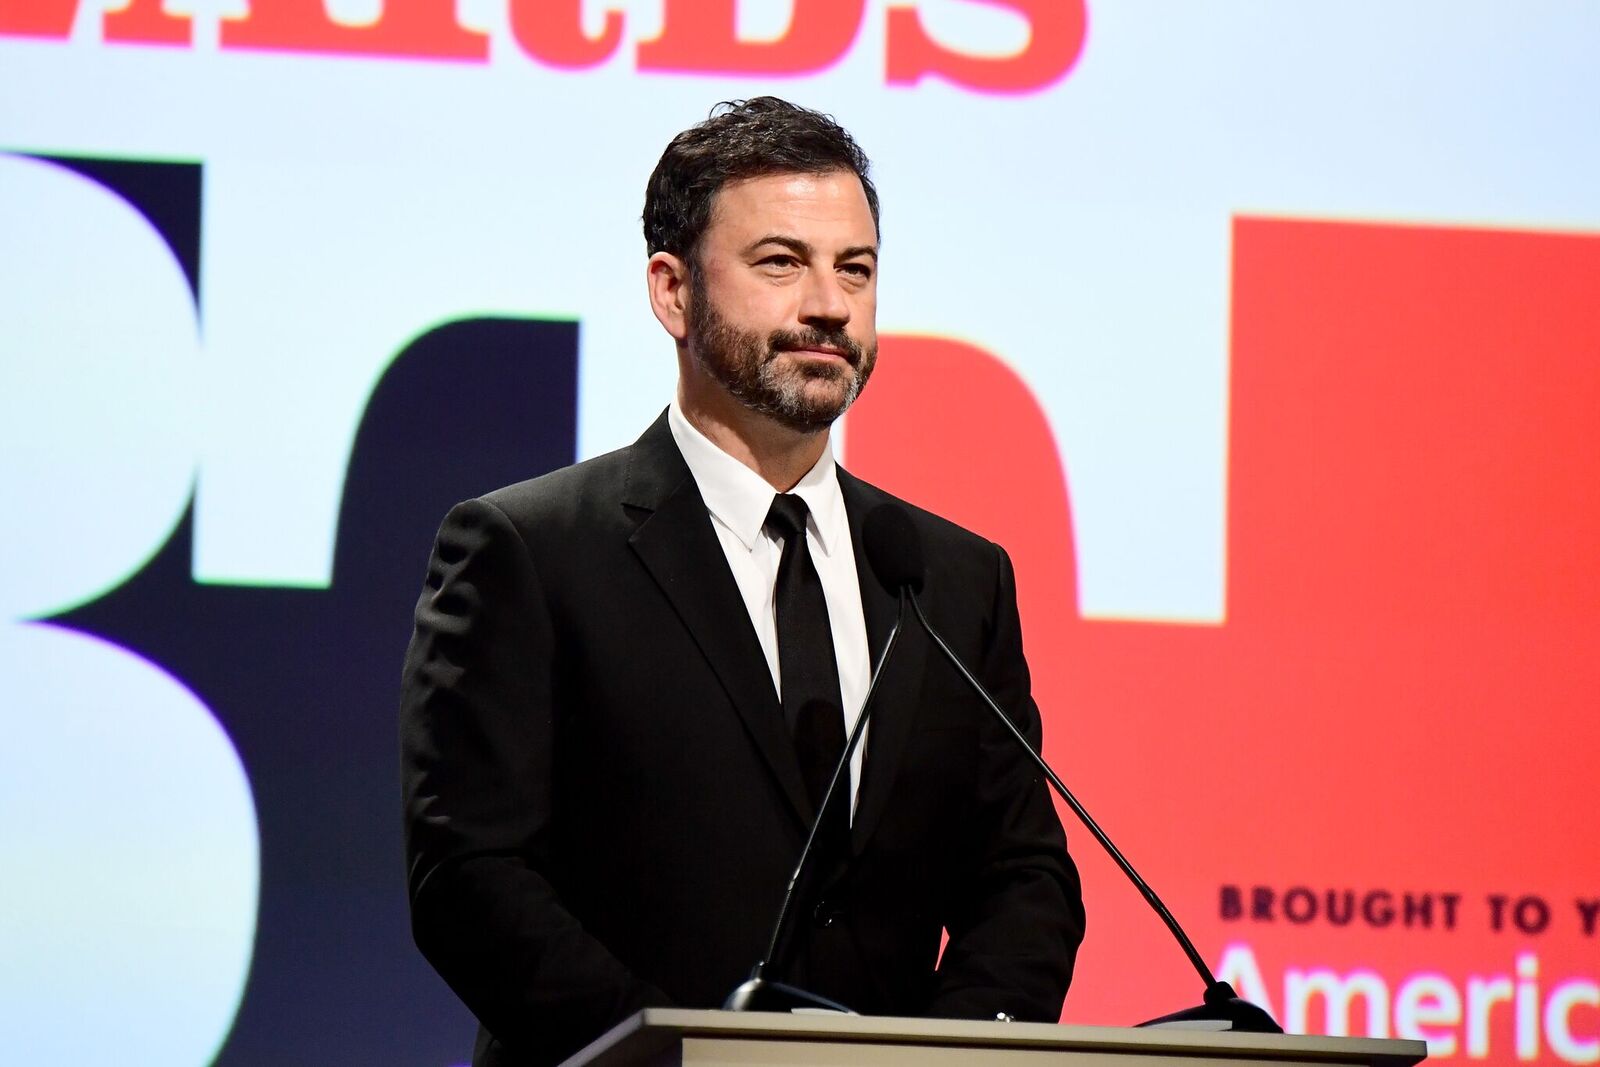 Host Jimmy Kimmel speaks onstage at Los Angeles LGBT Center's 48th Anniversary Gala Vanguard Awards at The Beverly Hilton Hotel on September 23, 2017 | Photo: Getty Images